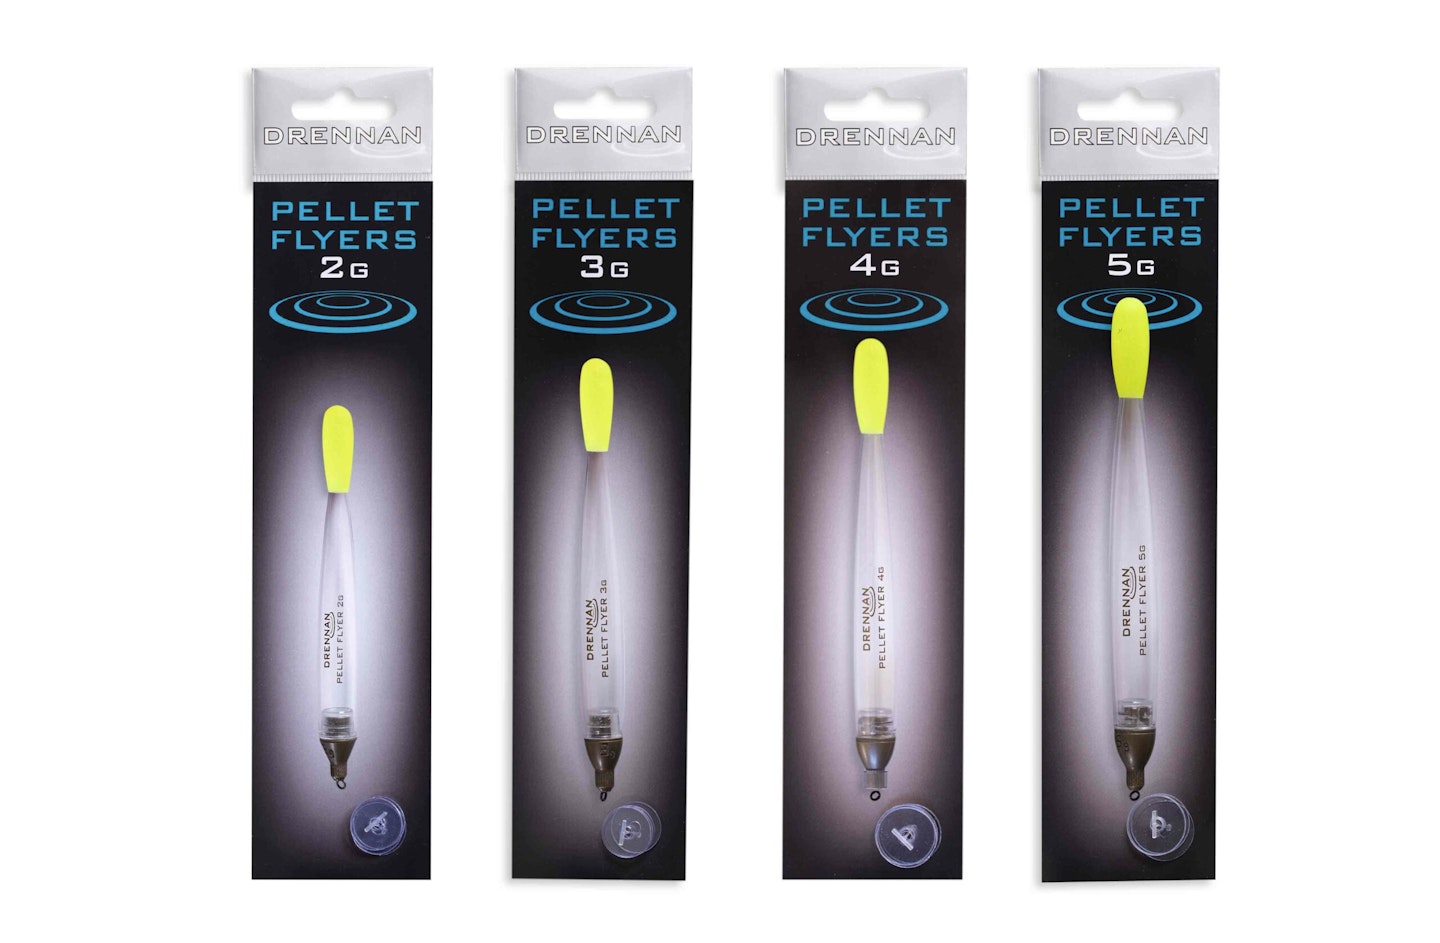 The best pellet wagglers review